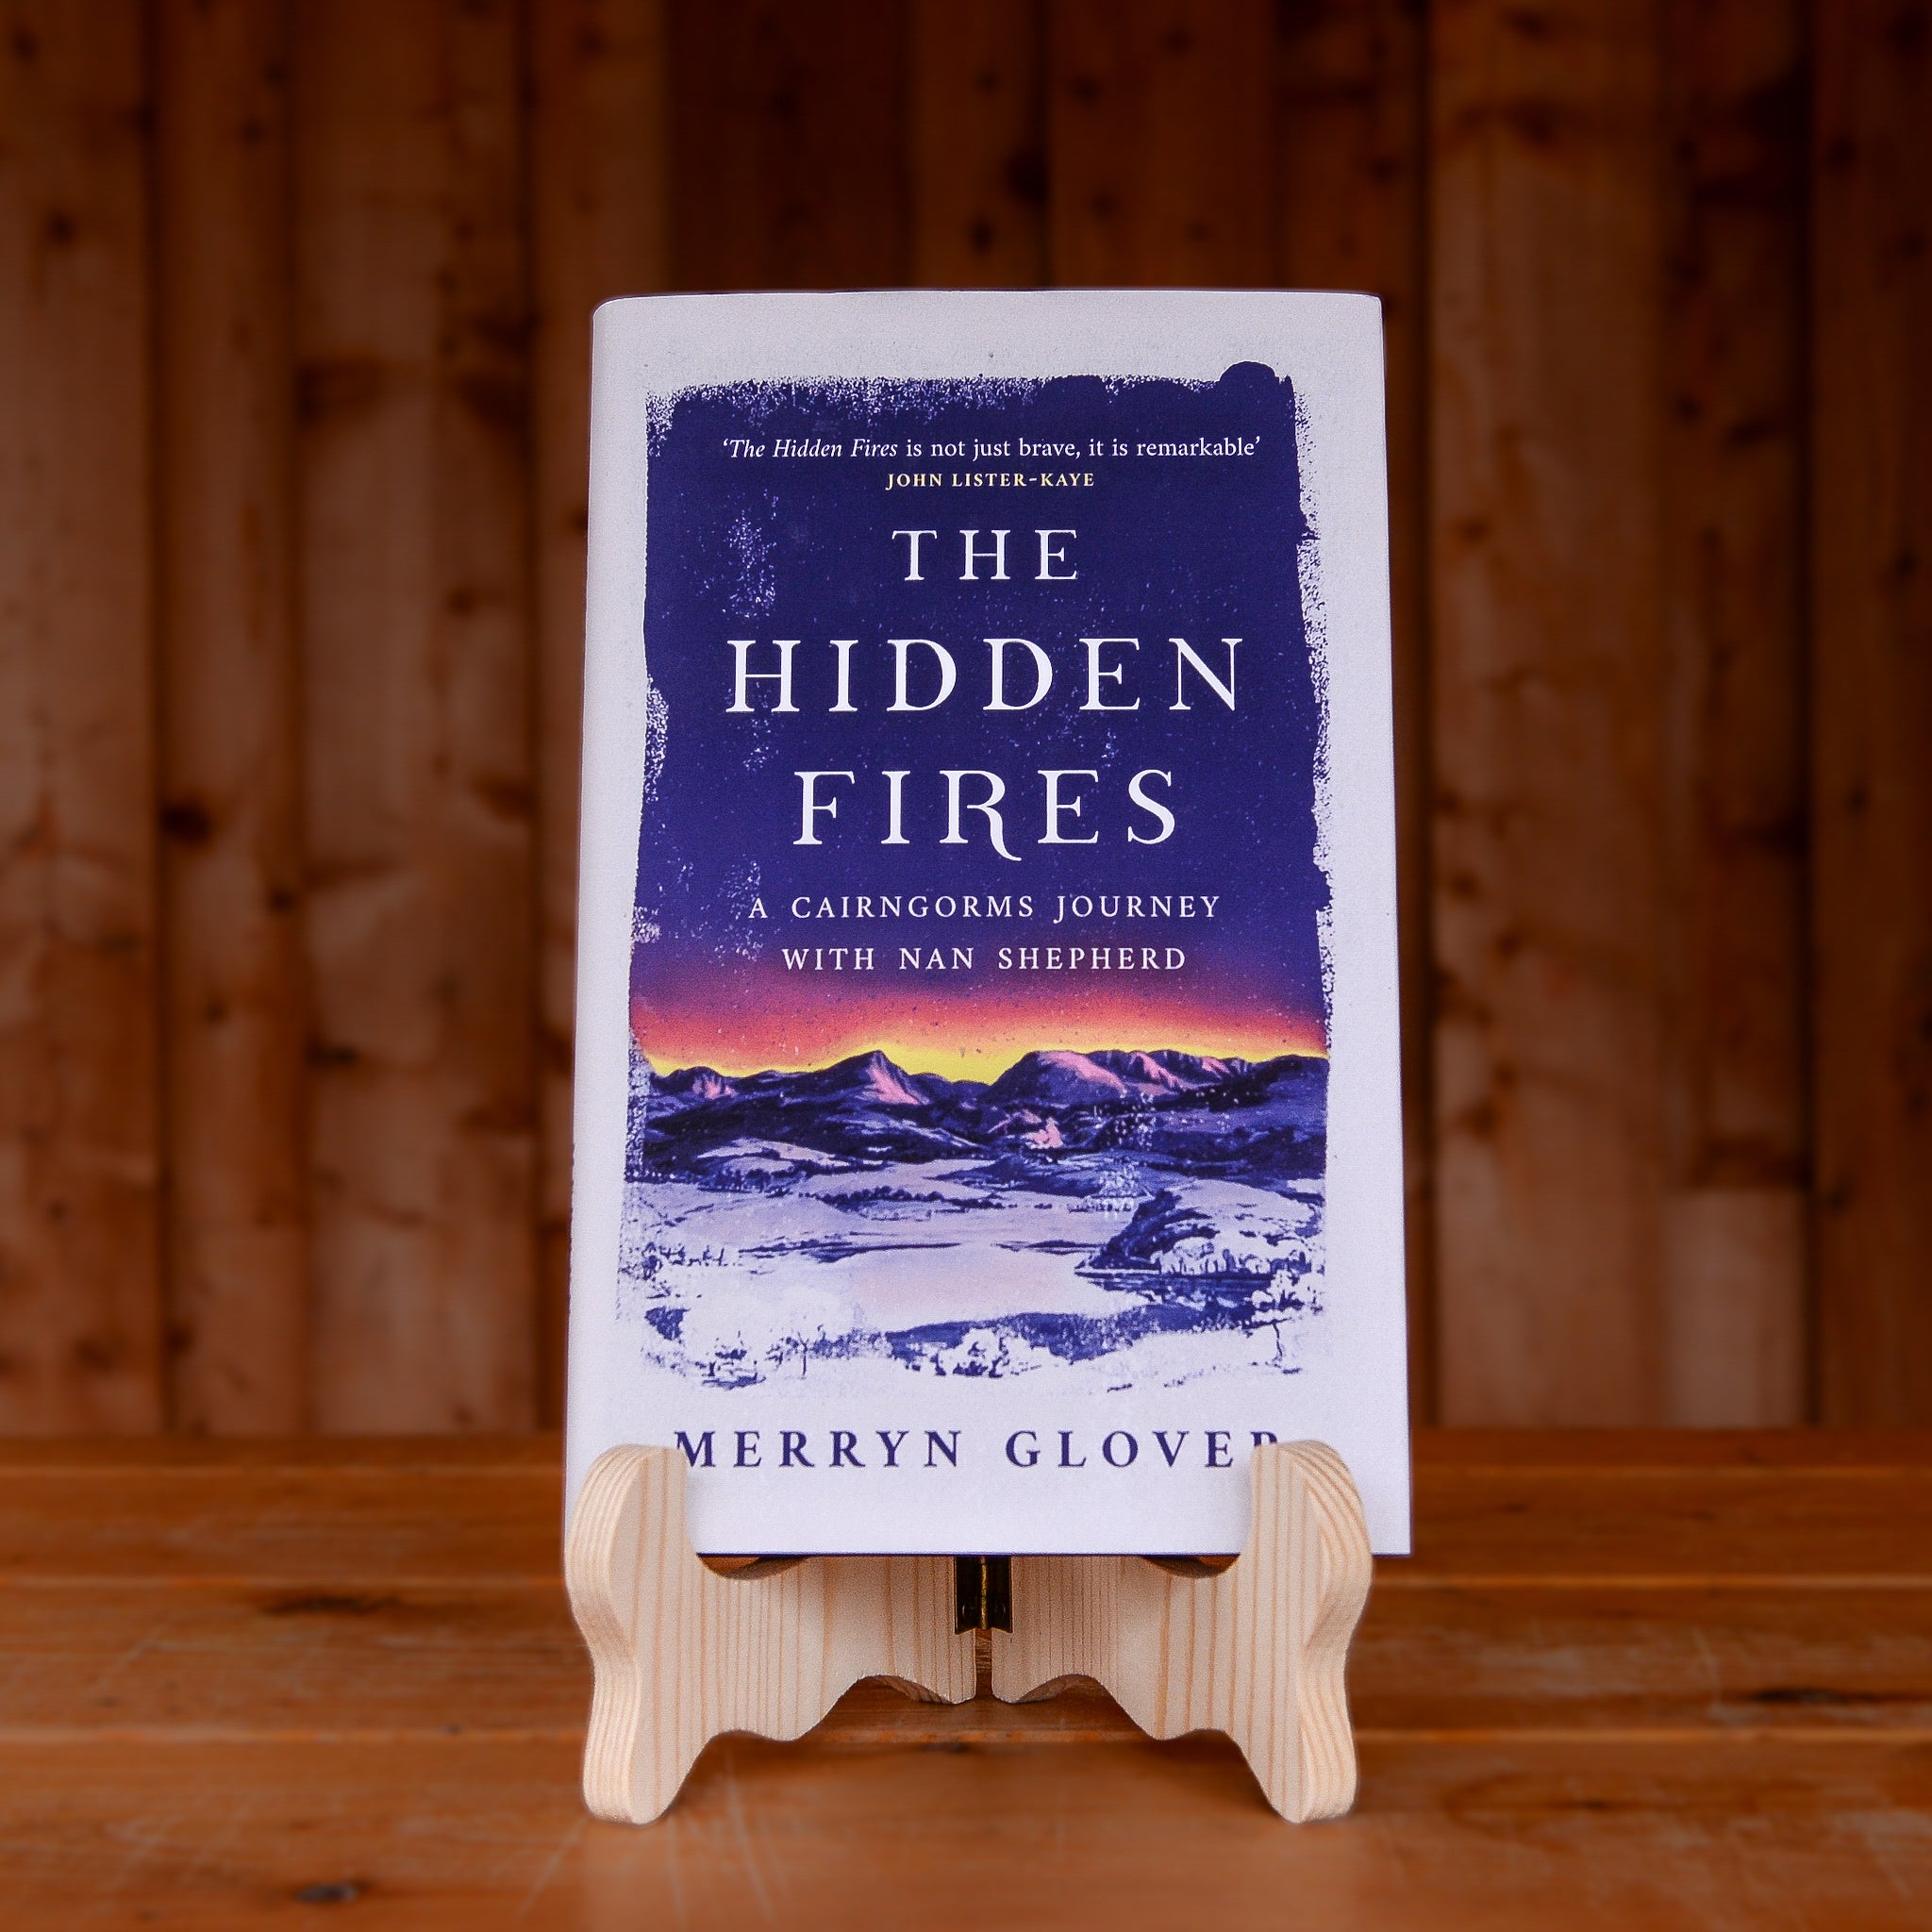 The book The Hidden Fires by Merryn Glover displayed on a book stand on a wooden table